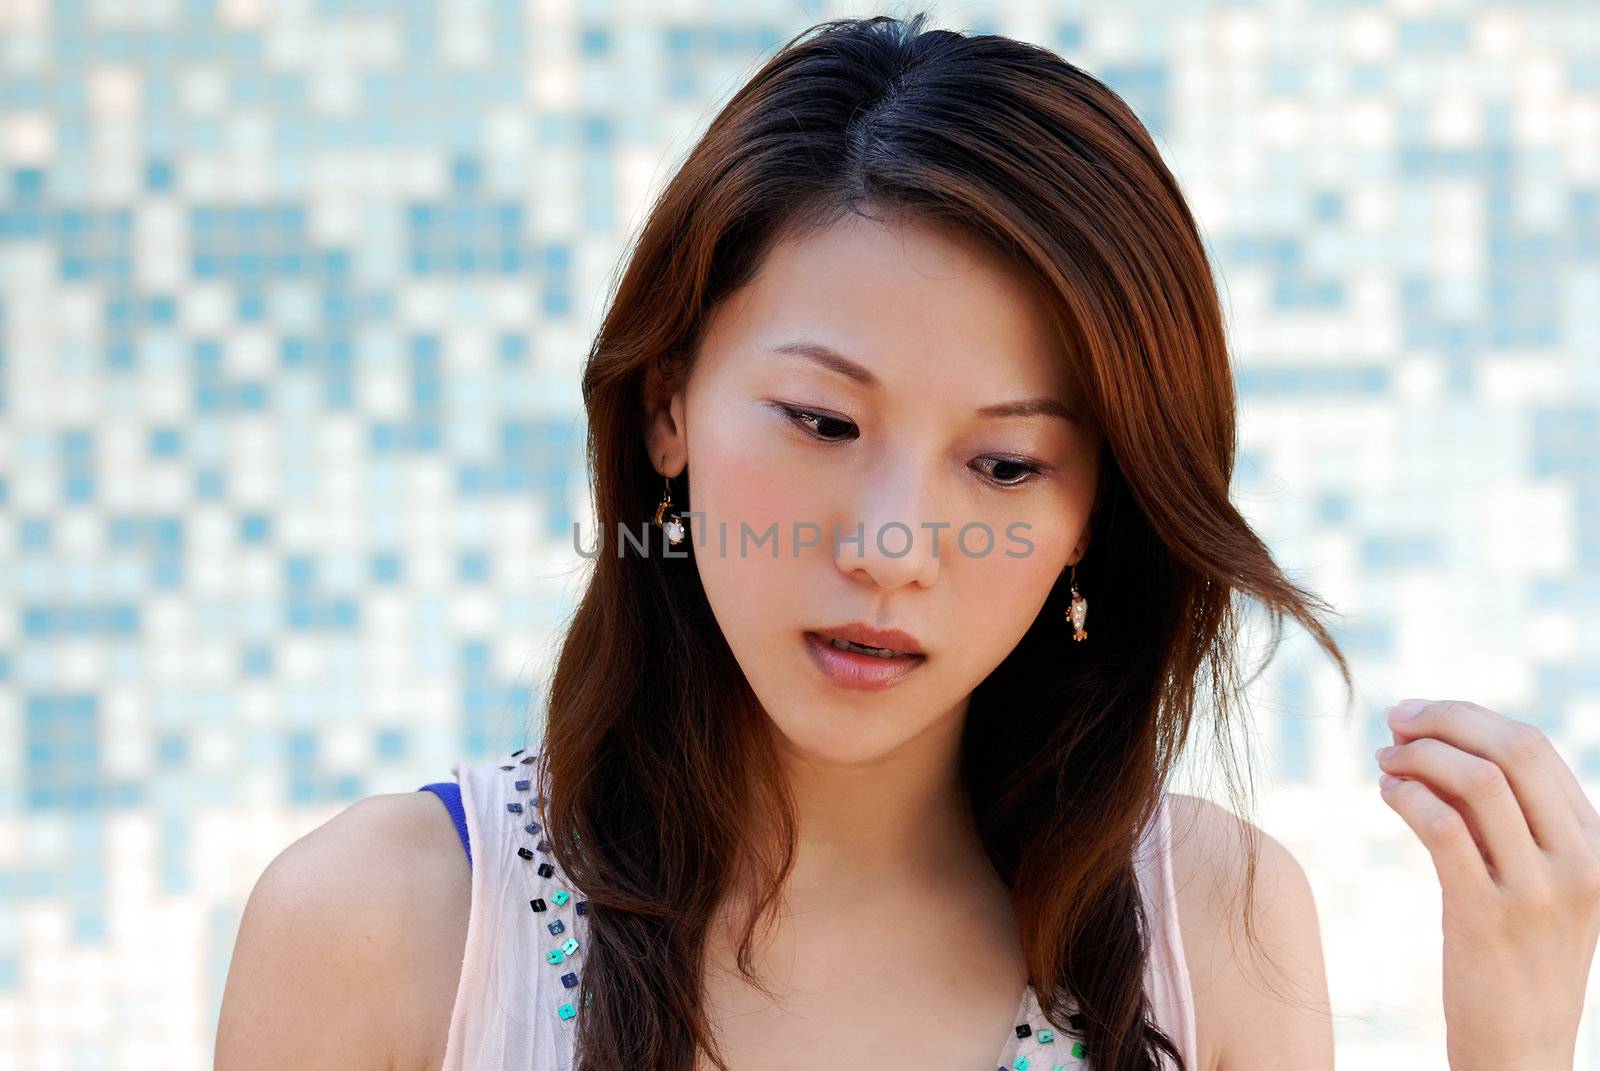 Here is a beautiful Asian lady in front of mosaic and watching.